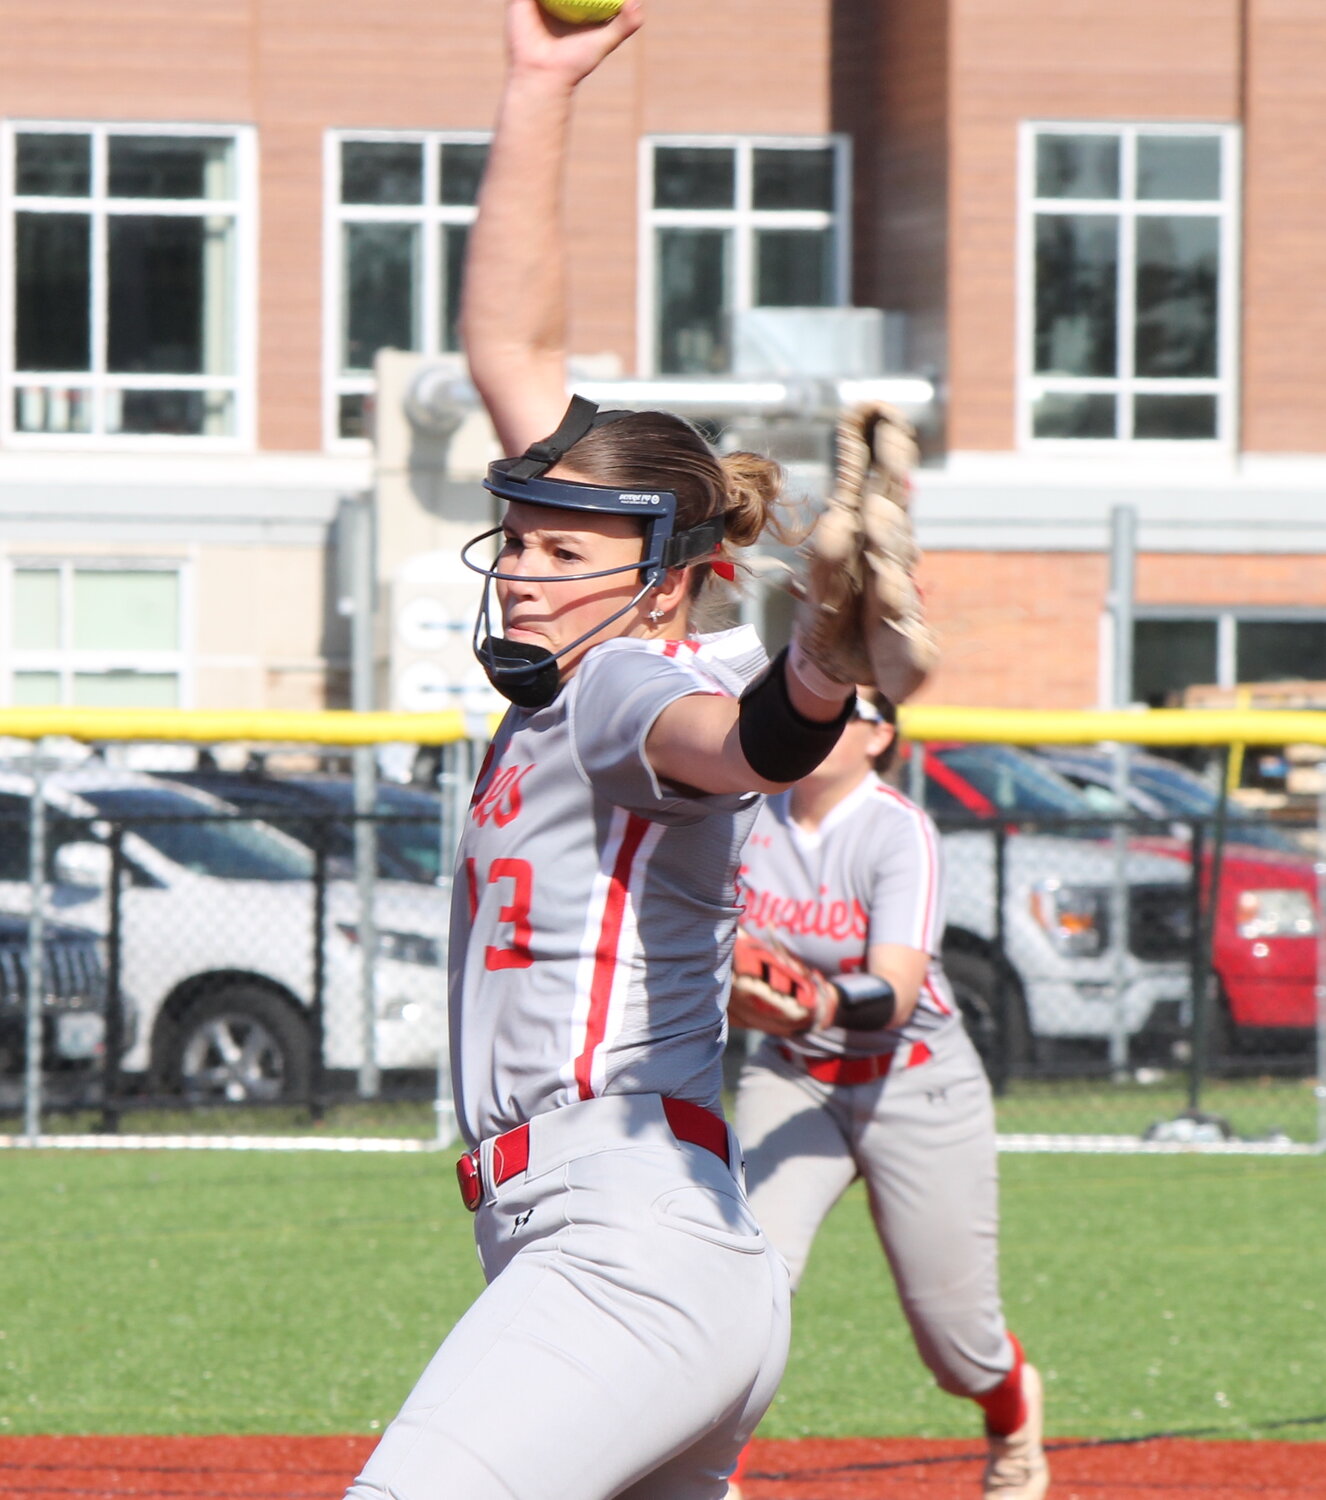 Keira Quadros delivers a pitch during the five-inning, perfect game she tossed in East Providence's 13-0 victory over visiting Moses Brown Wednesday afternoon, May 17.